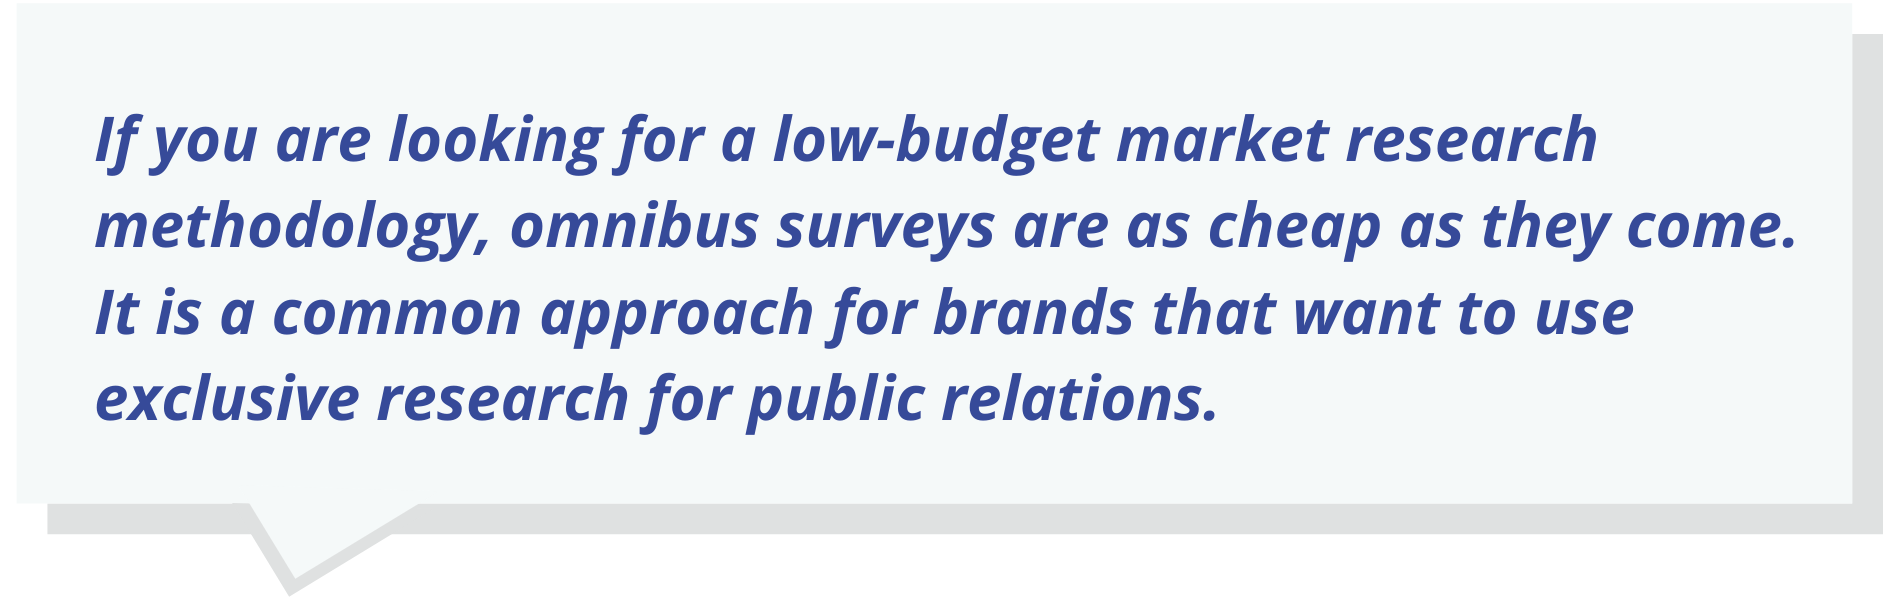 If you are looking for a low-budget market research methodology, omnibus surveys are as cheap as they come. It is a common approach for brands that want to use exclusive research for public relations.